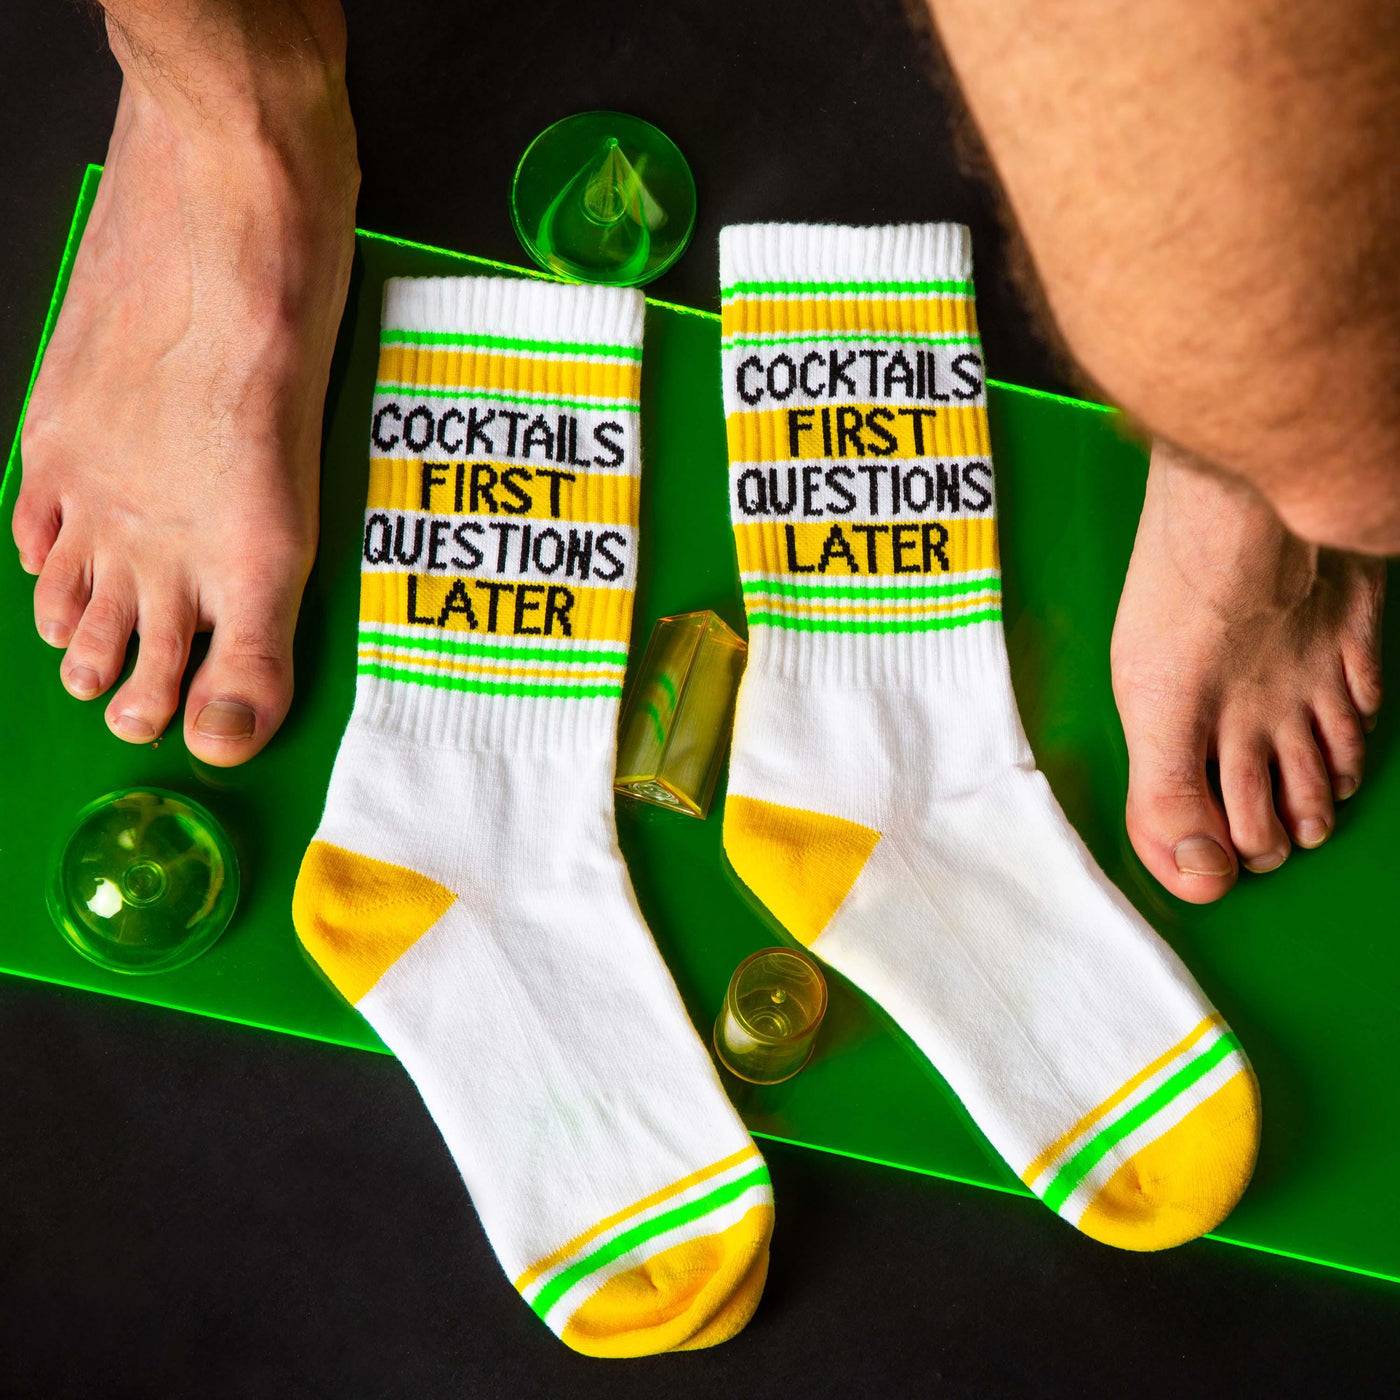 COCKTAILS FIRST QUESTIONS LATER Gym Socks - Gumball Poodle - The Sock Monster